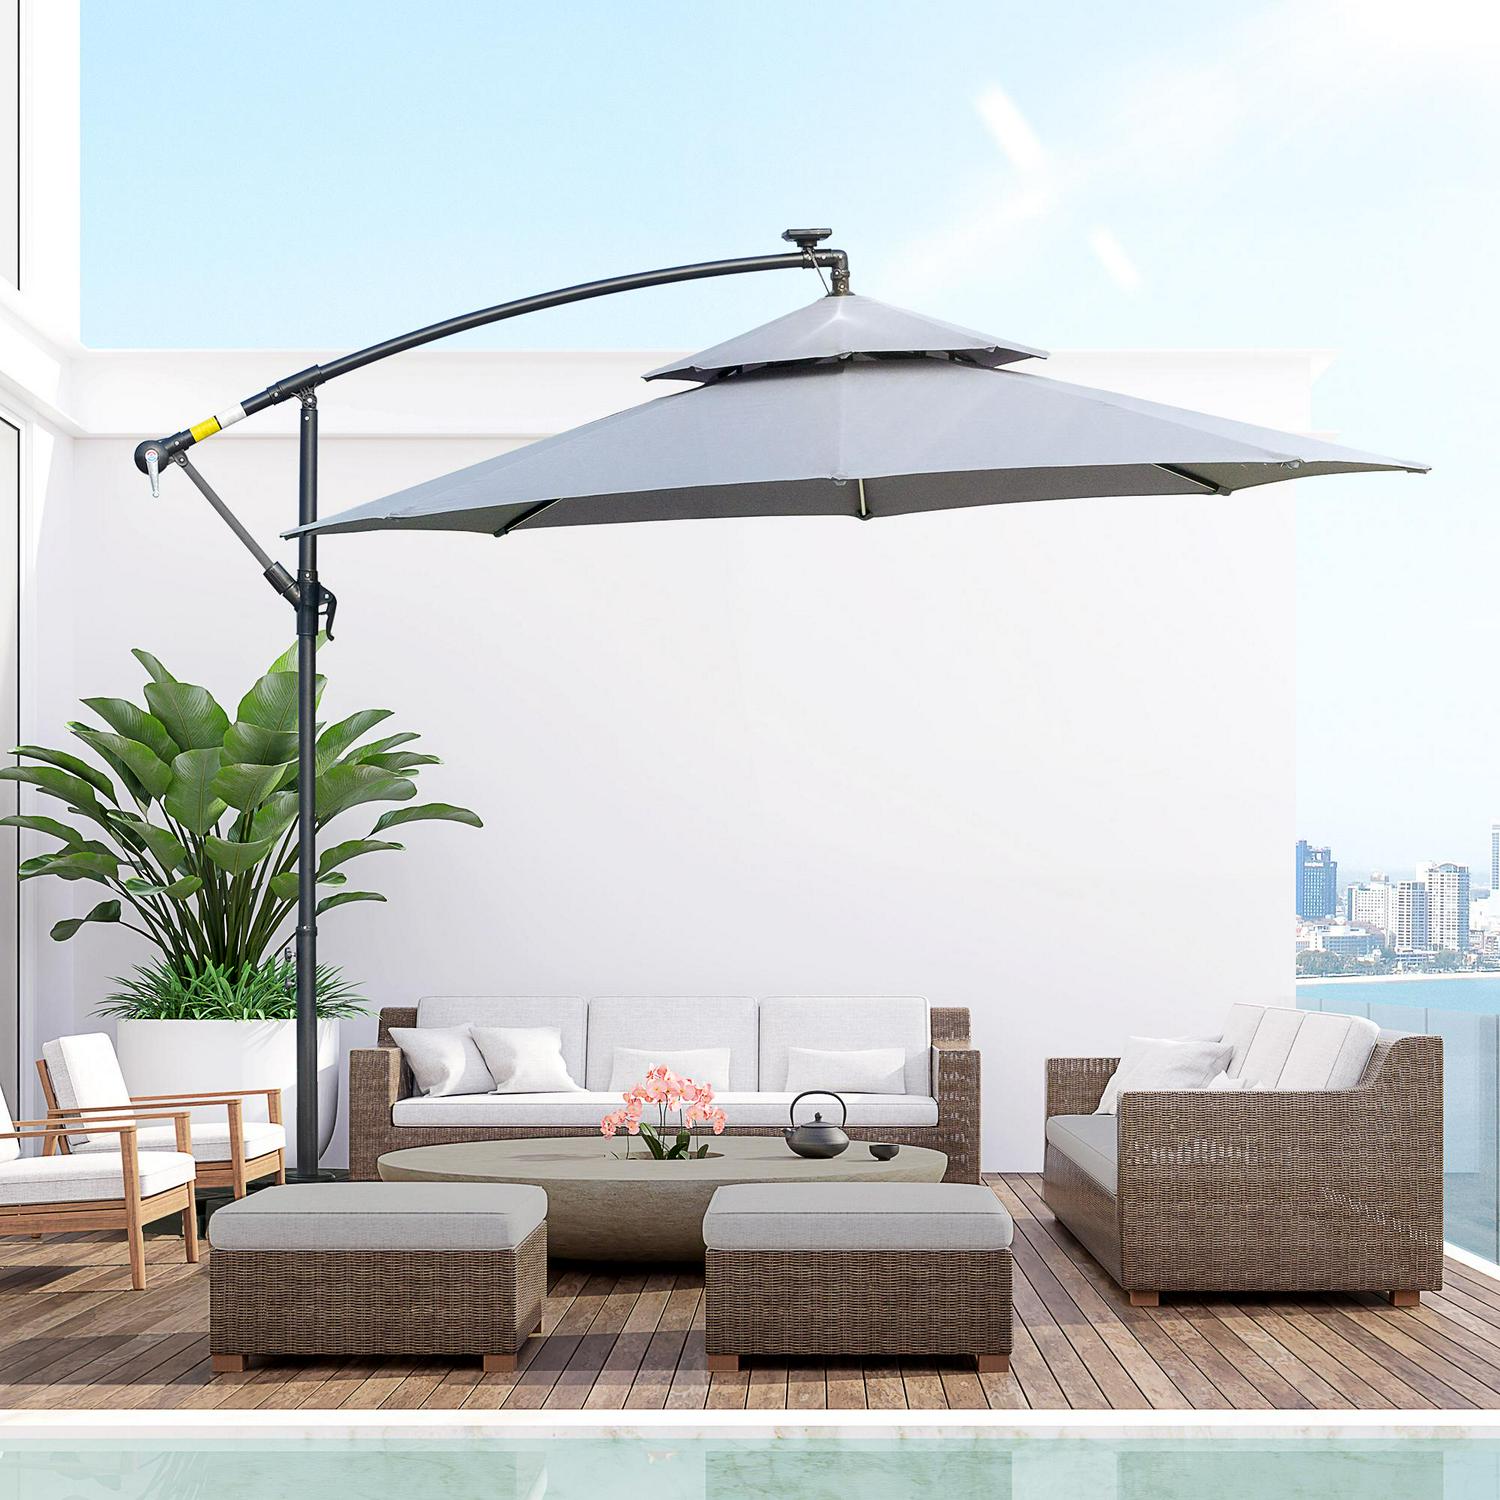 Cantilever Banana Parasol Hanging Umbrella With Double Roof- Grey